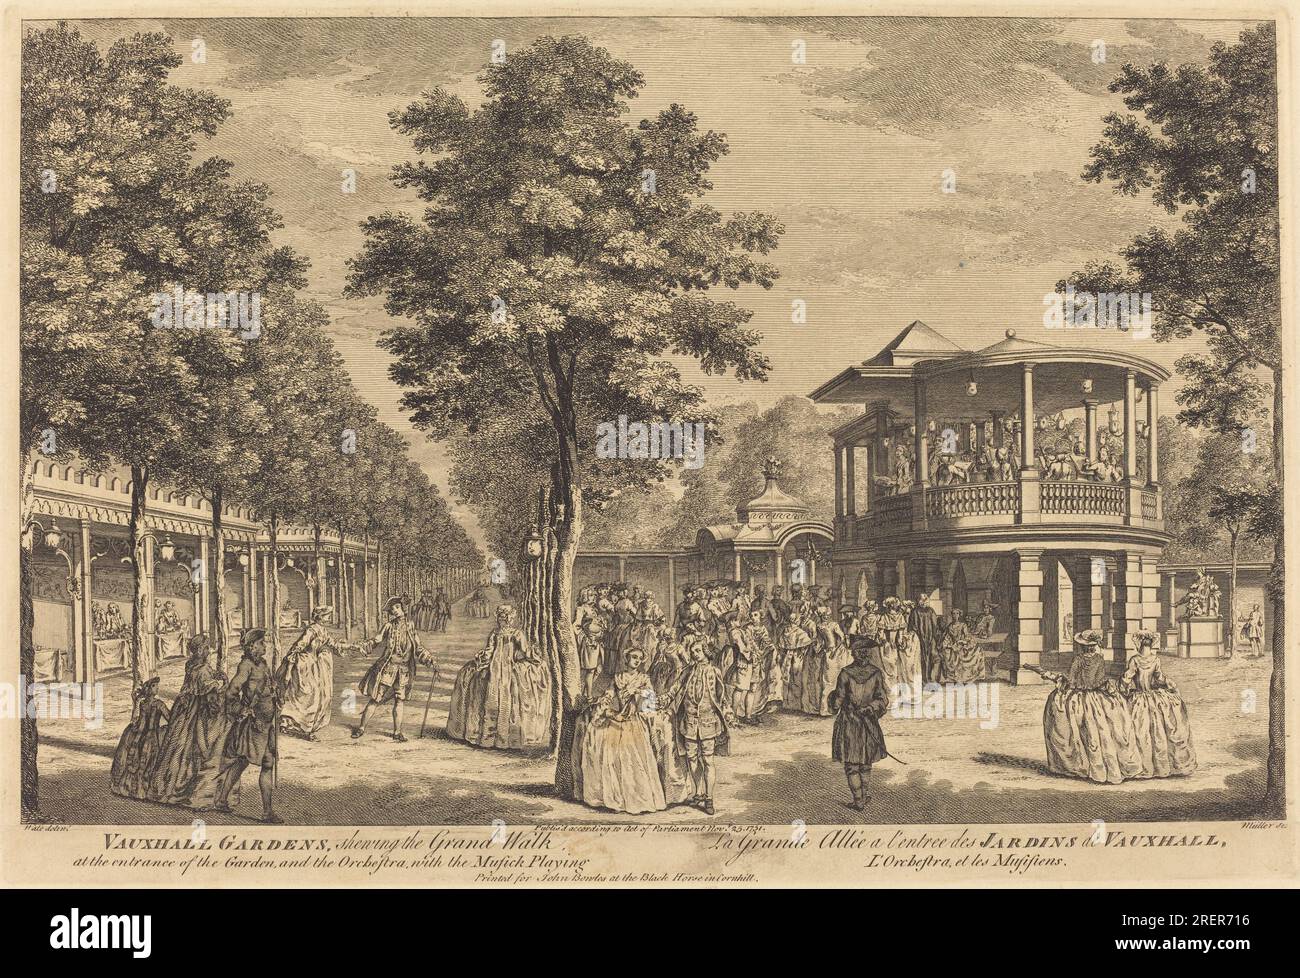 'Johann Sebastian Müller after Samuel Wale, Vauxhall Gardens shewing the Grand Walk at the Entrance of the Garden and the Orchestra with Musick Playing, 1751, etching and engraving on laid paper, plate: 28.2 x 41.5 cm (11 1/8 x 16 5/16 in.) sheet: 32.6 x 45.3 cm (12 13/16 x 17 13/16 in.), Ailsa Mellon Bruce Fund, 1996.69.4' Stock Photo